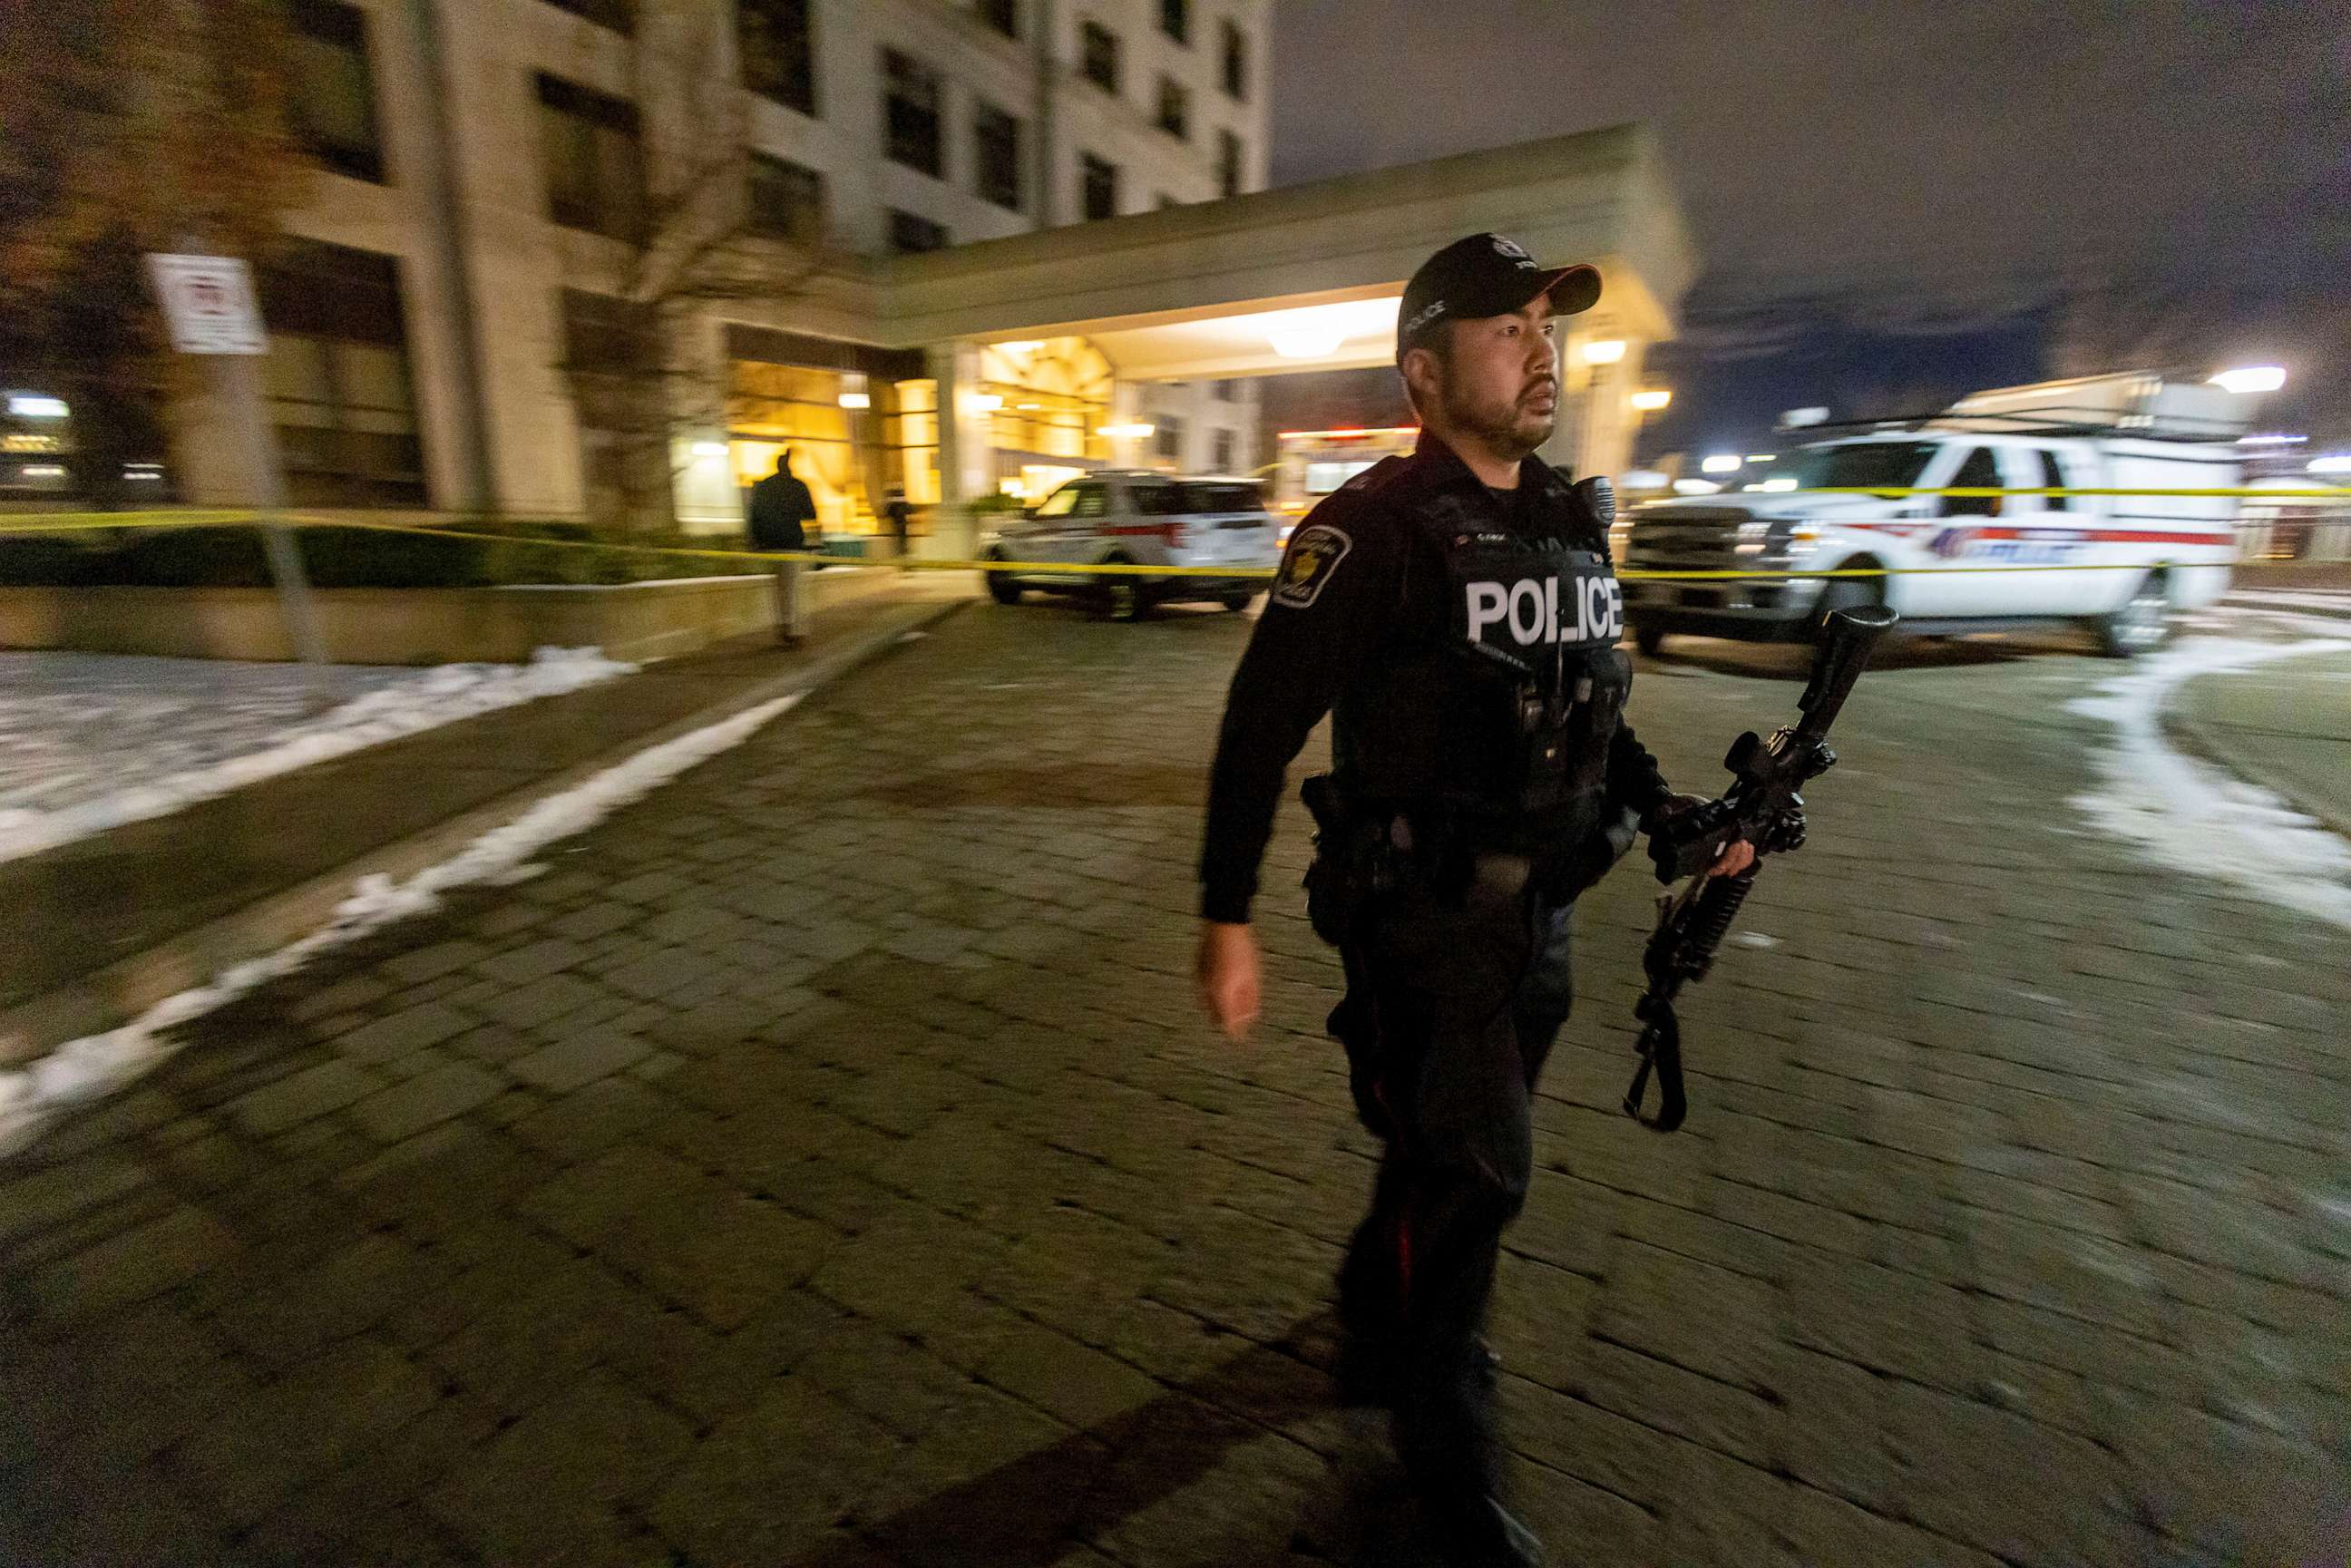 PHOTO: A police officer walks with a weapon after a fatal mass shooting at a condominium building in the Toronto suburb of Vaughan, Ontario, Canada, Dec. 19, 2022.